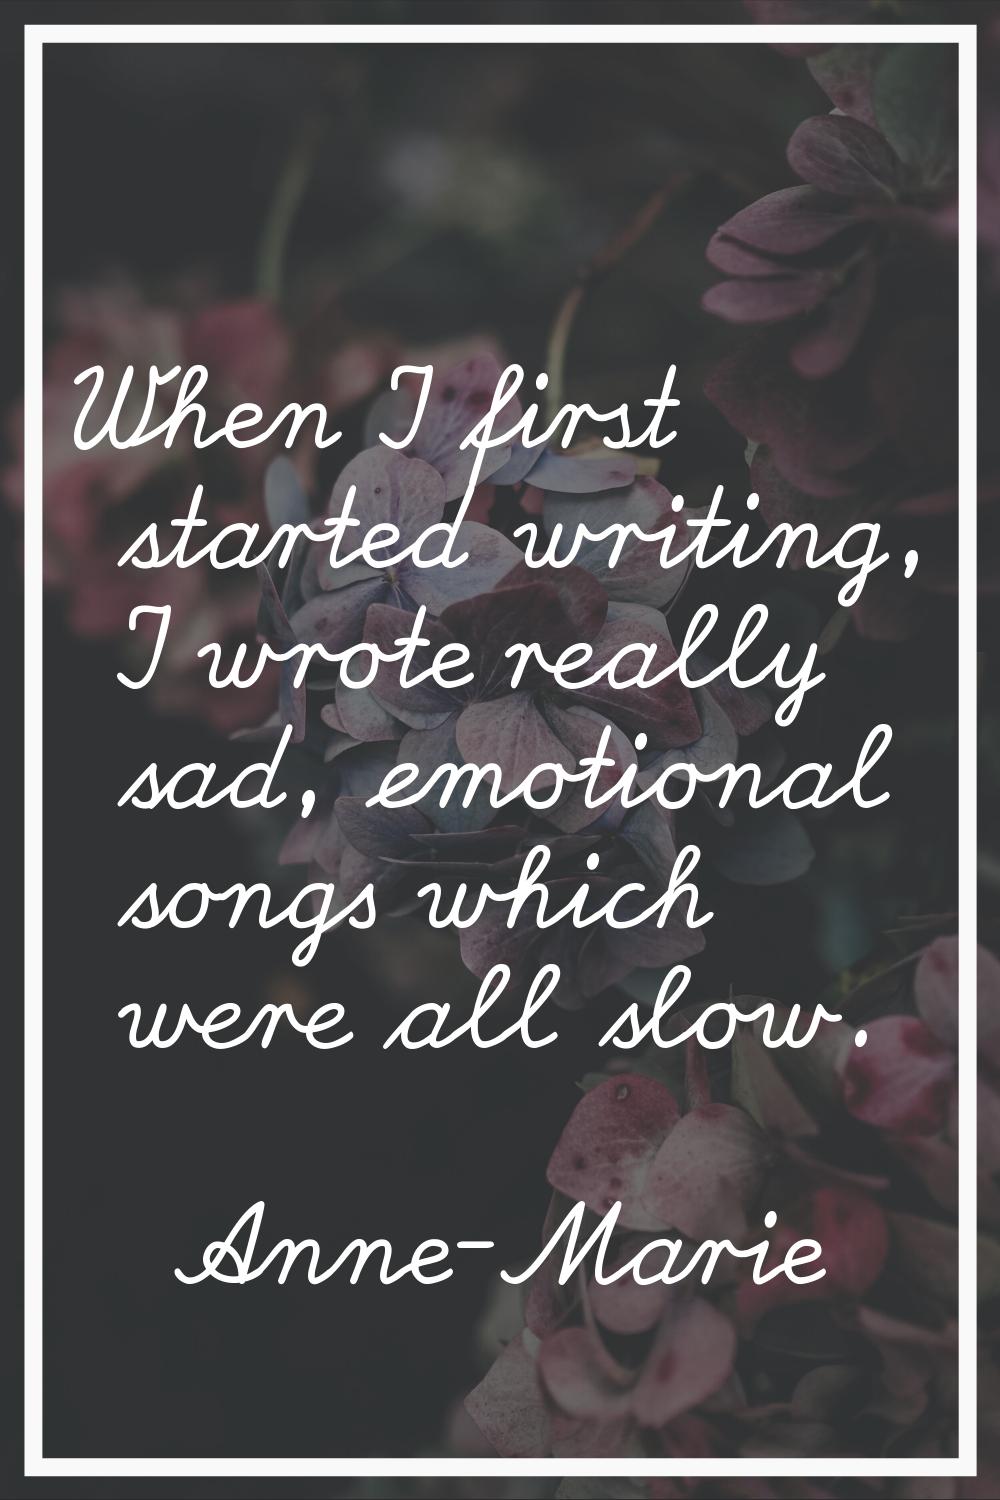 When I first started writing, I wrote really sad, emotional songs which were all slow.